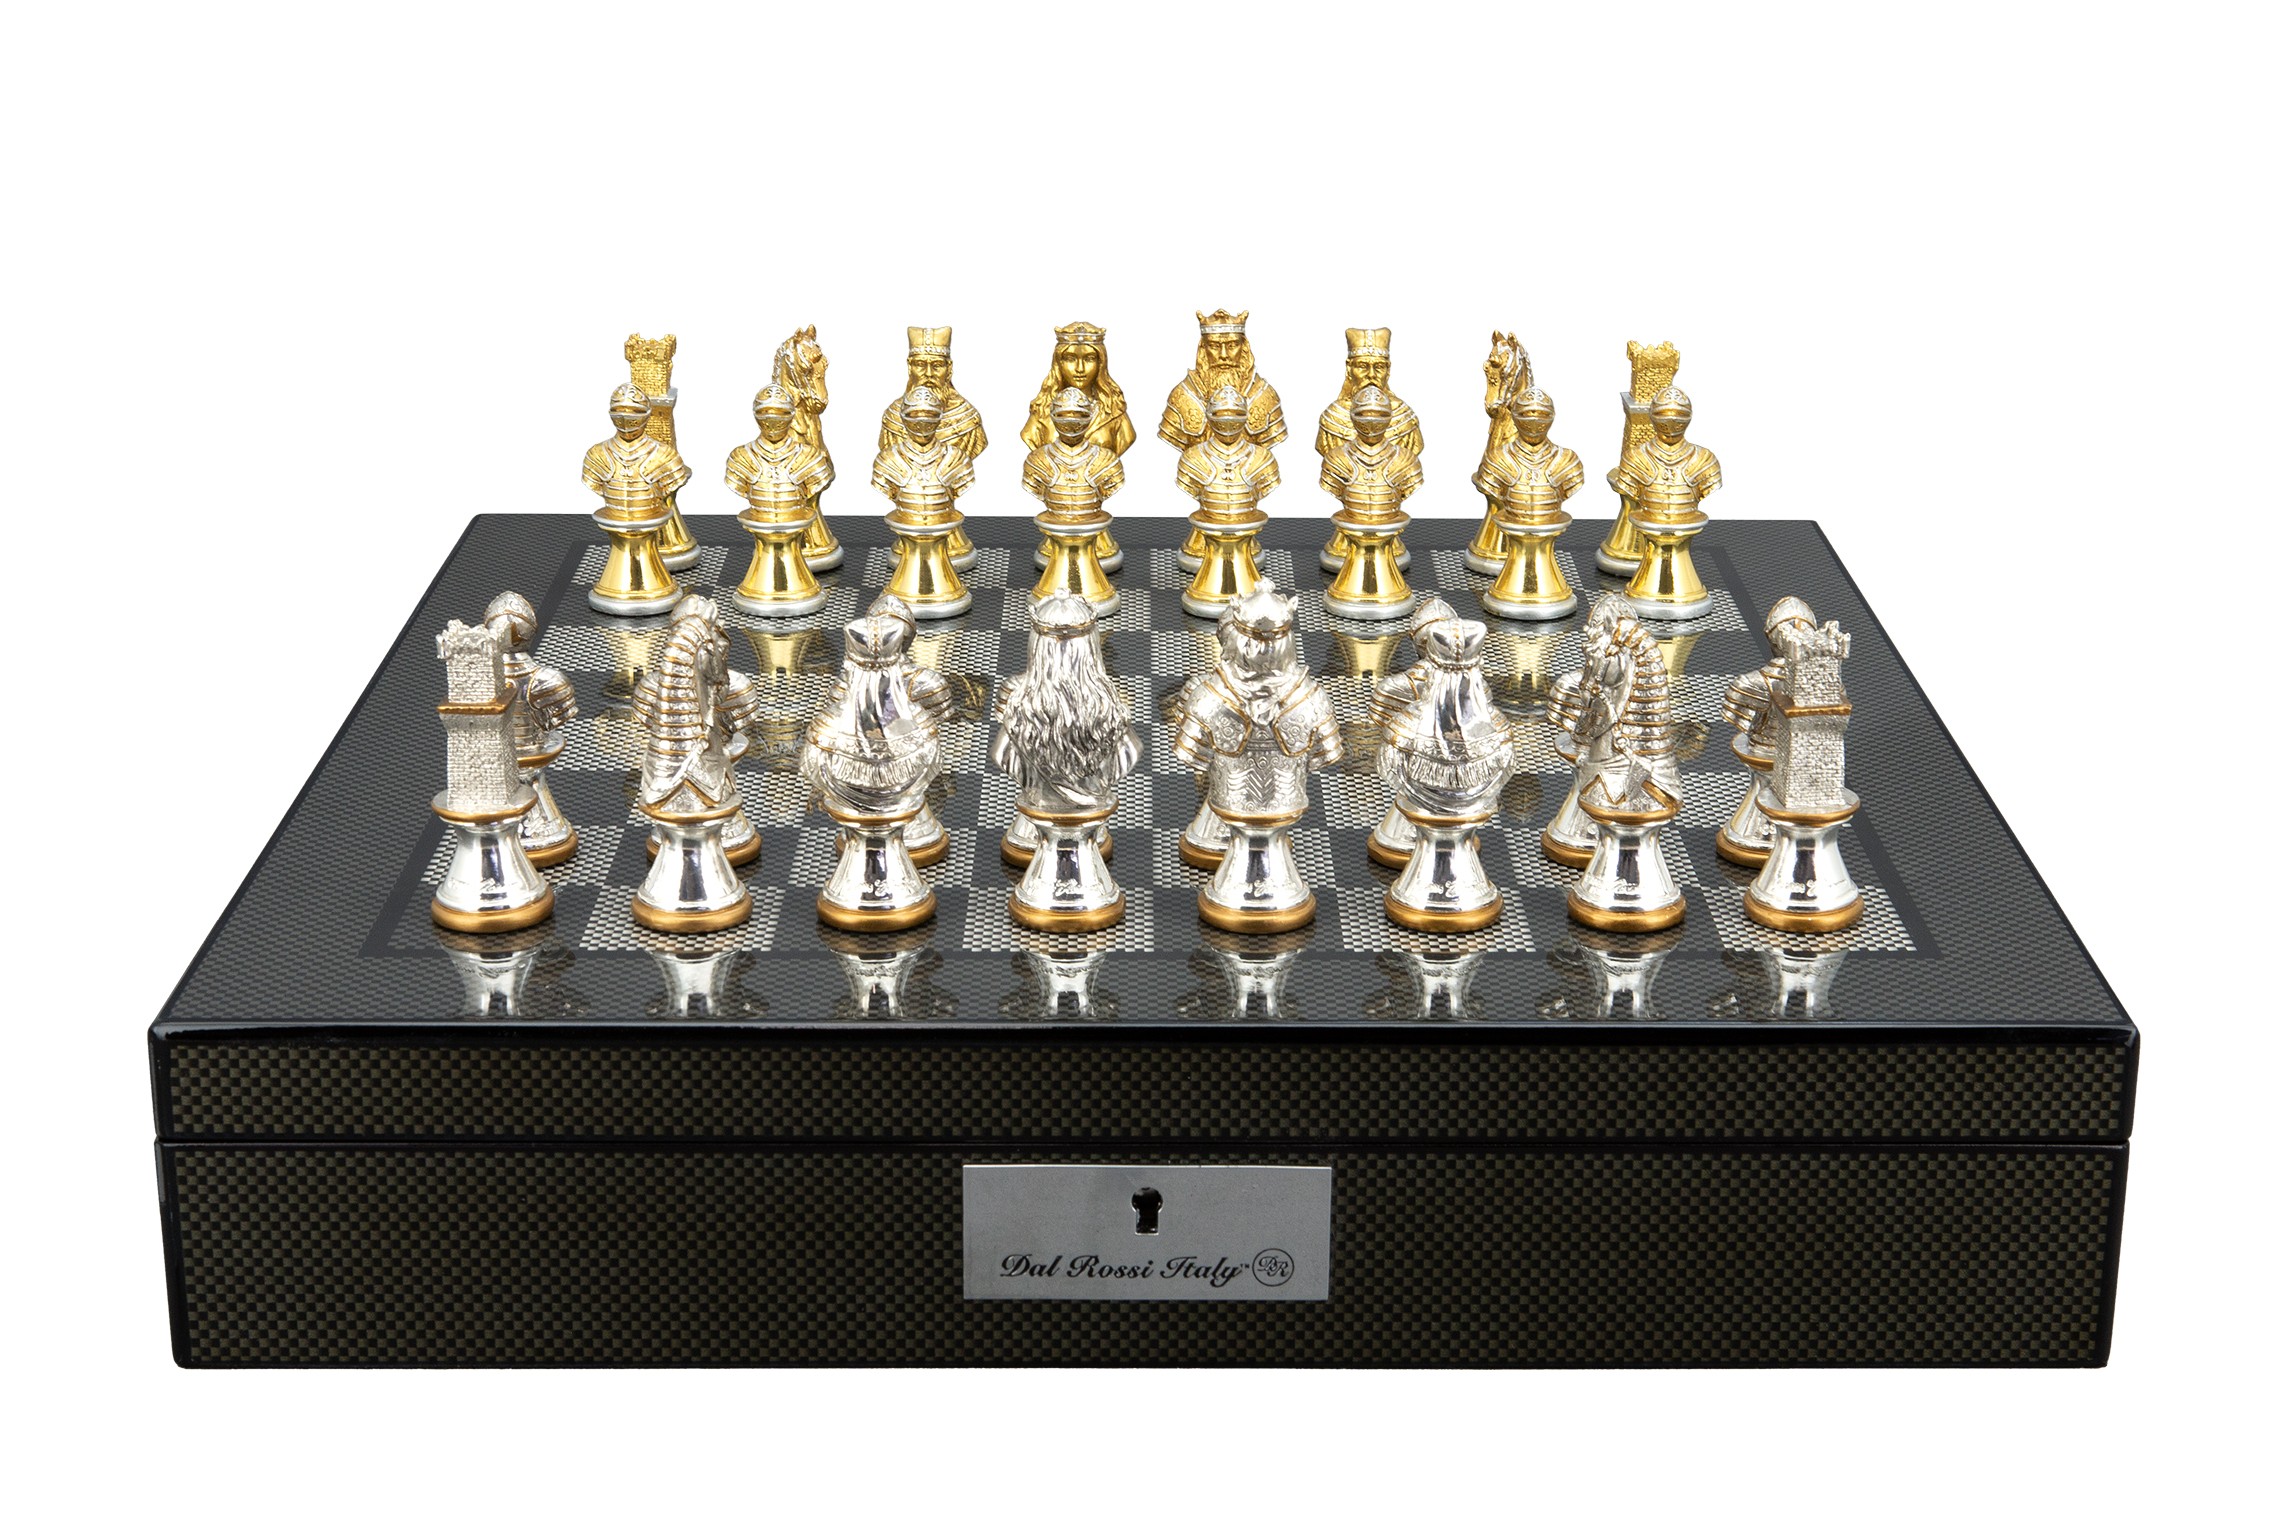 Dal Rossi Medieval Warriors Metal Chessmen 85mm on a Carbon Fibre Finish Shiny Chess Box with Compartments 16"